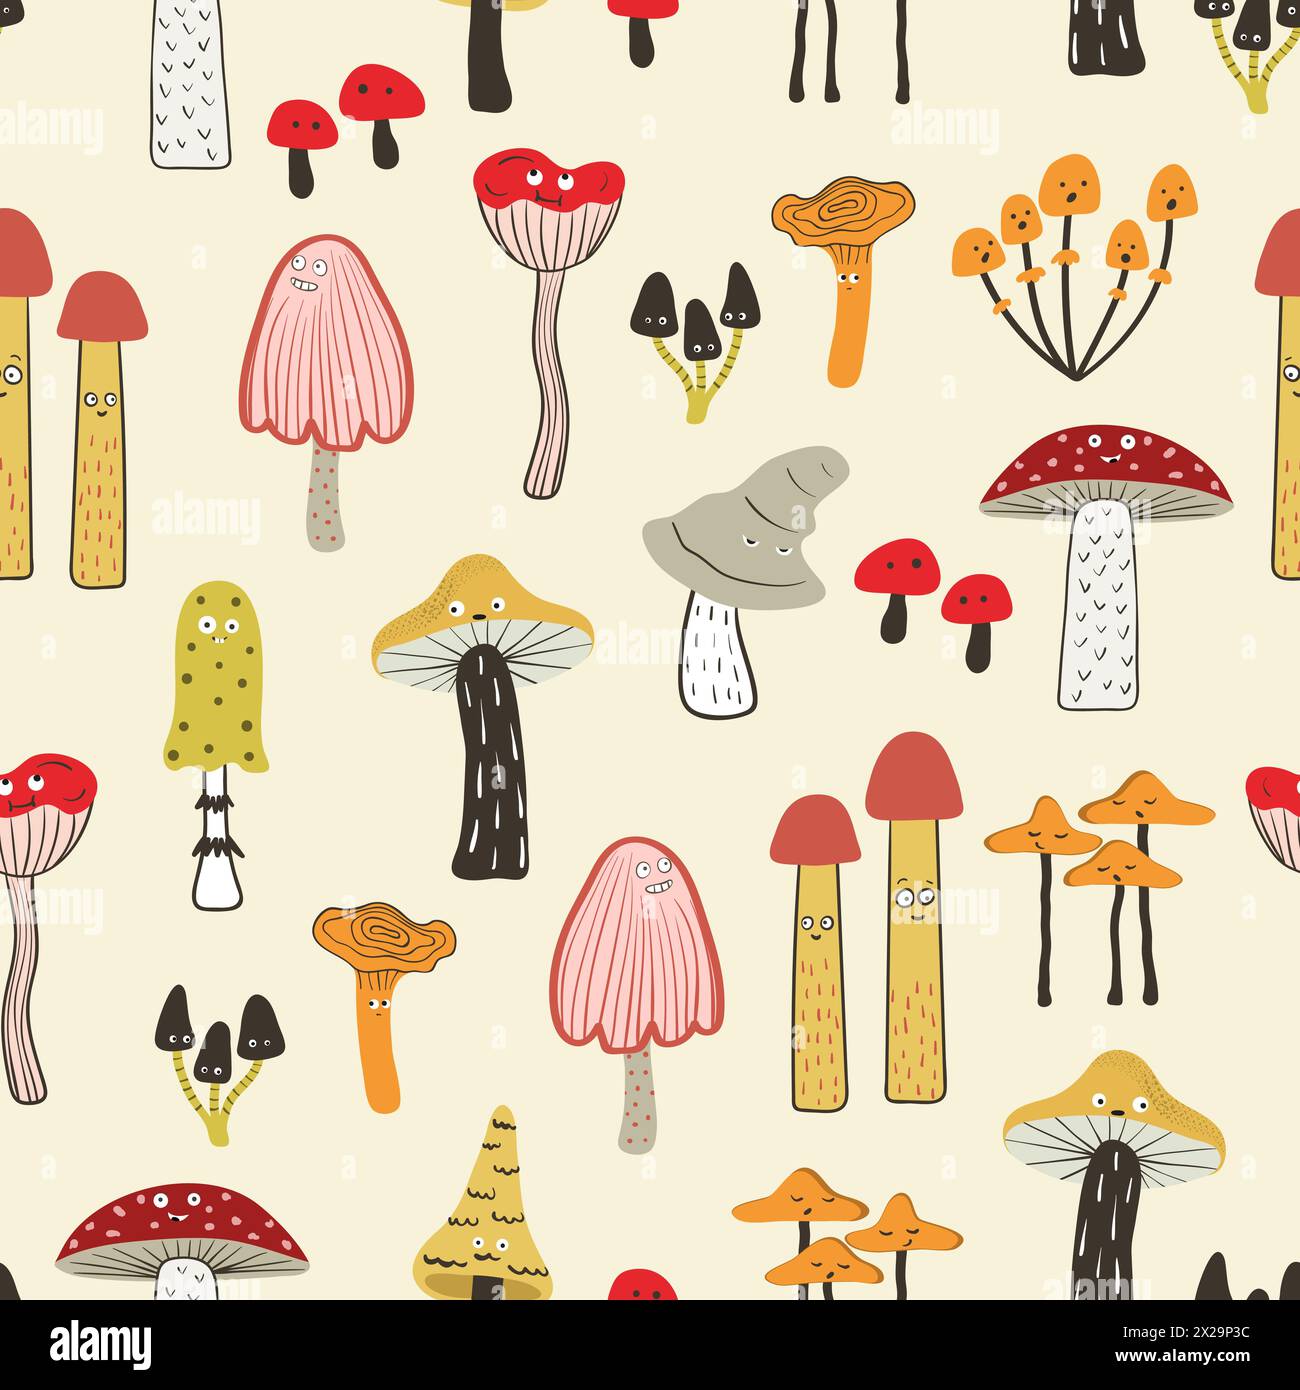 Cartoon mushrooms with eyes seamless pattern. Funny print with characters Stock Vector